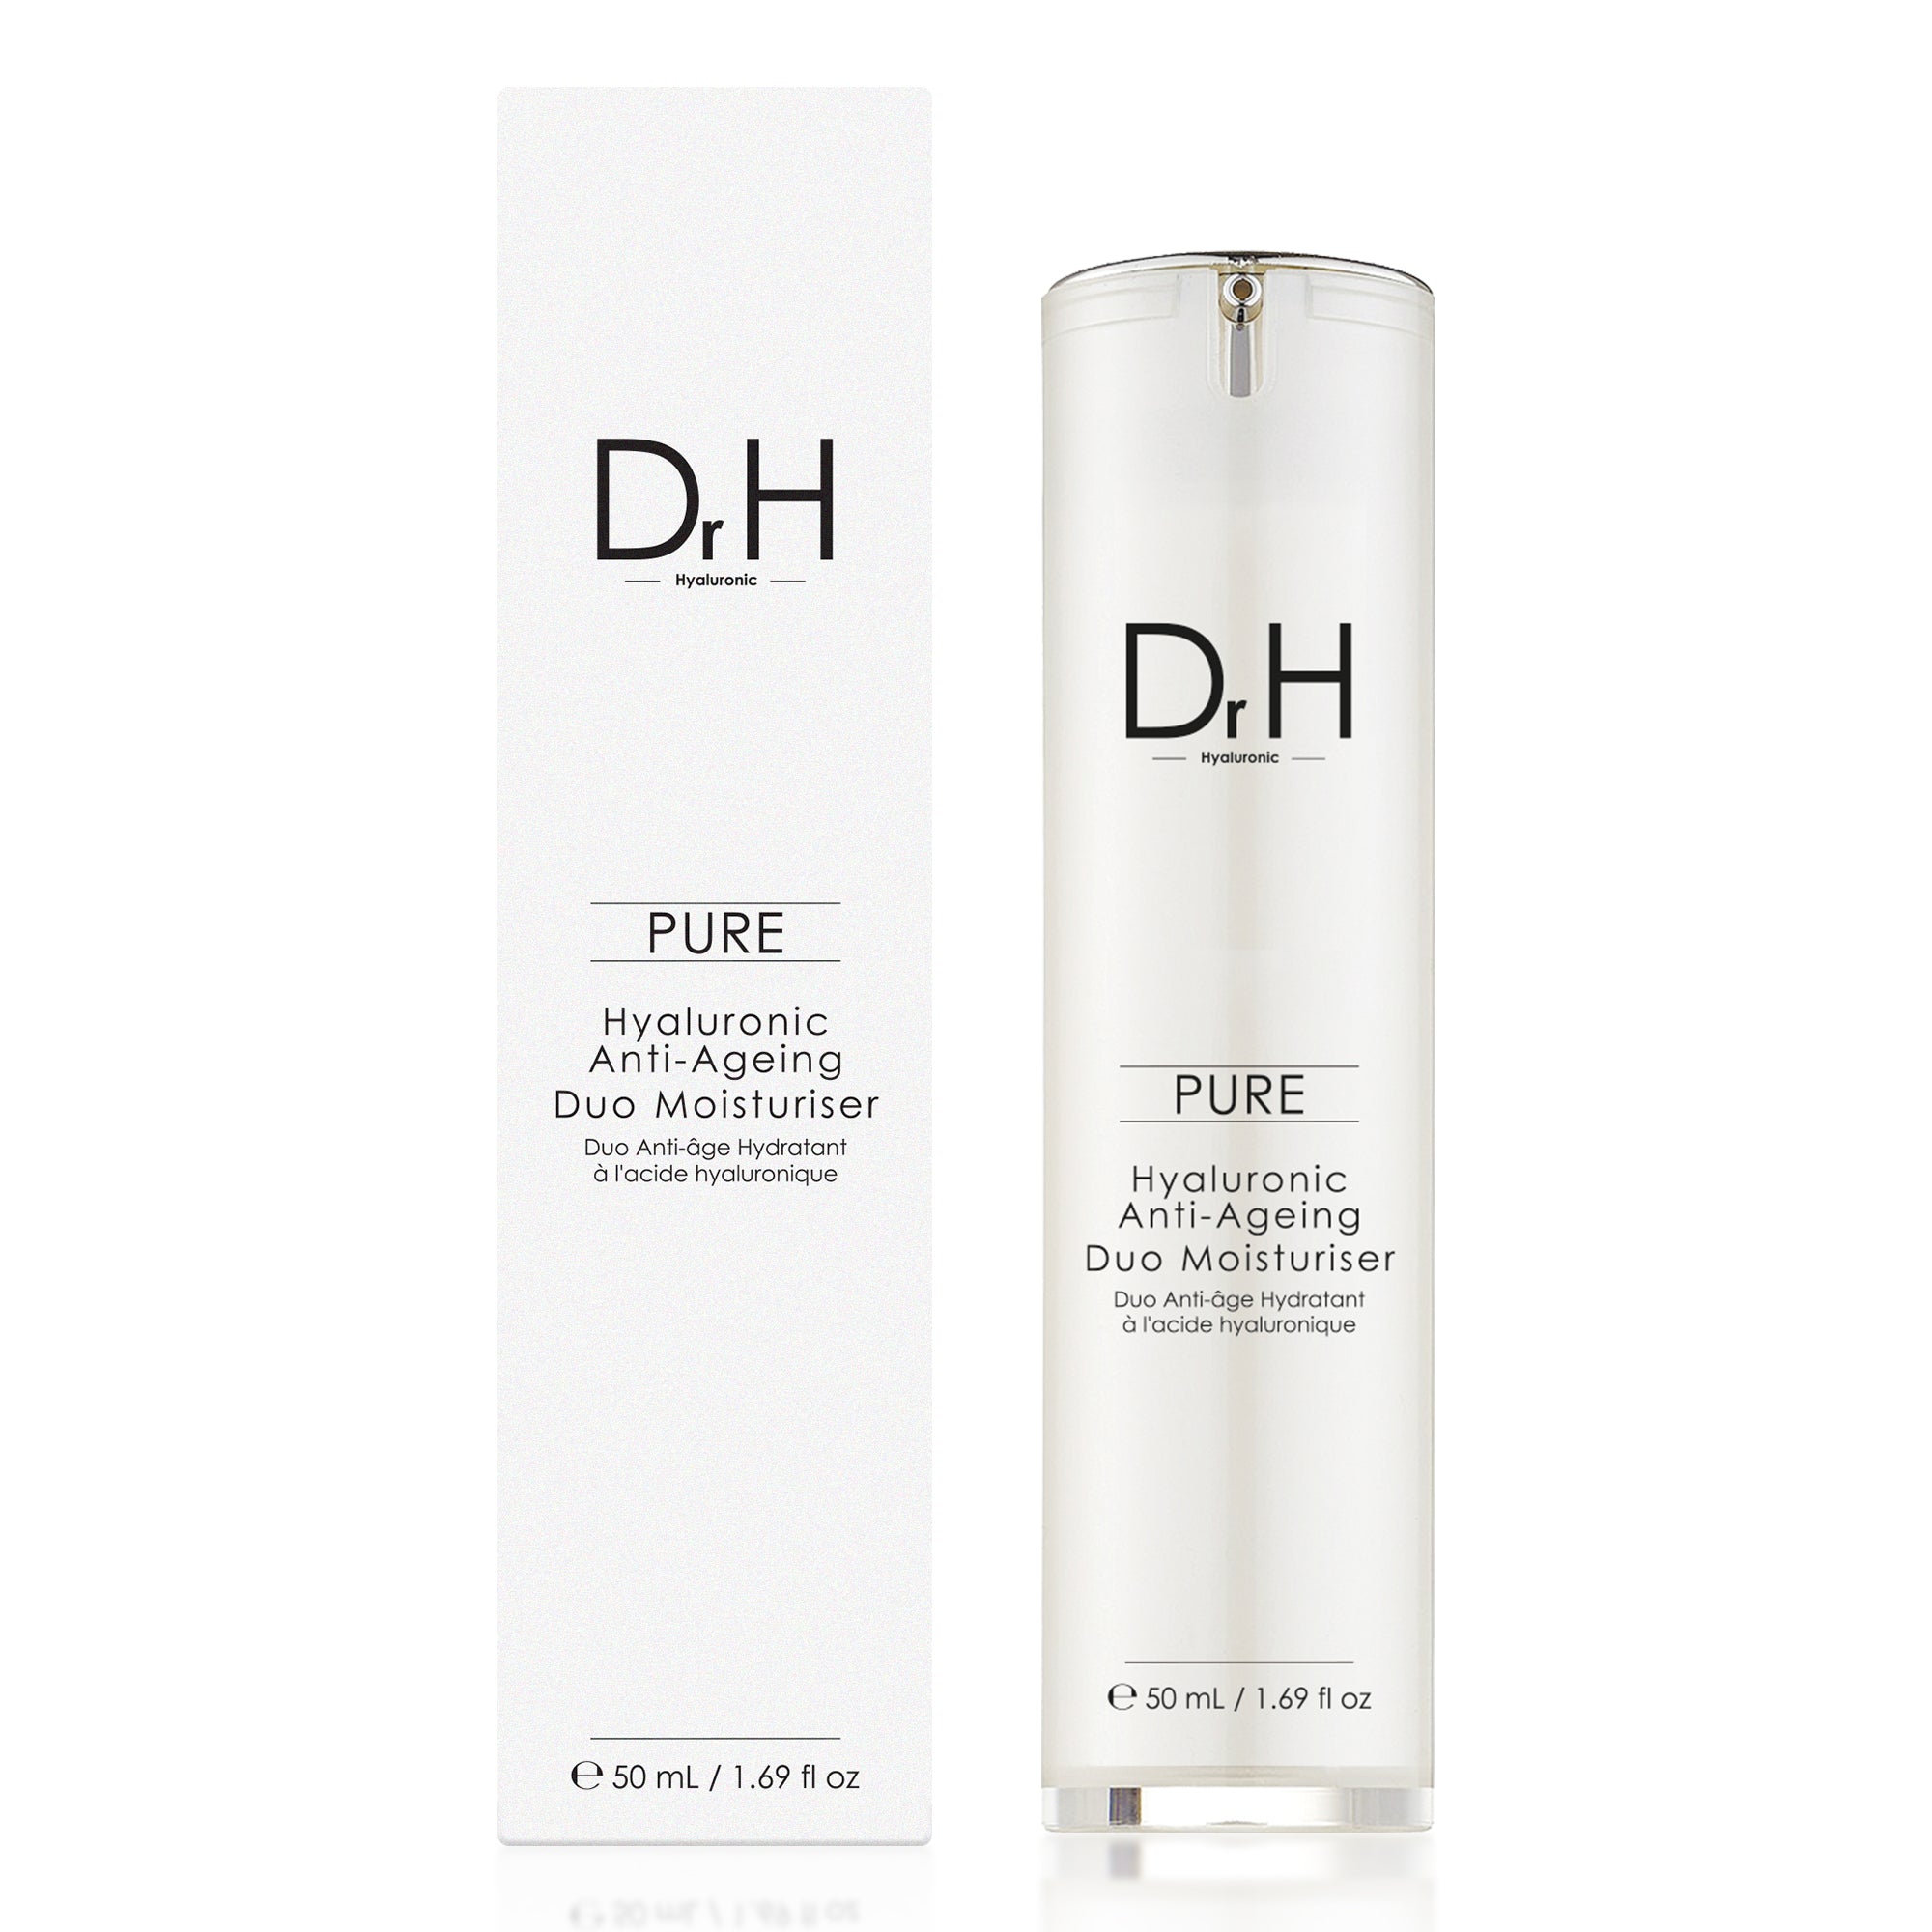 Hyaluronic Acid Anti-Aging Day & Night Pack